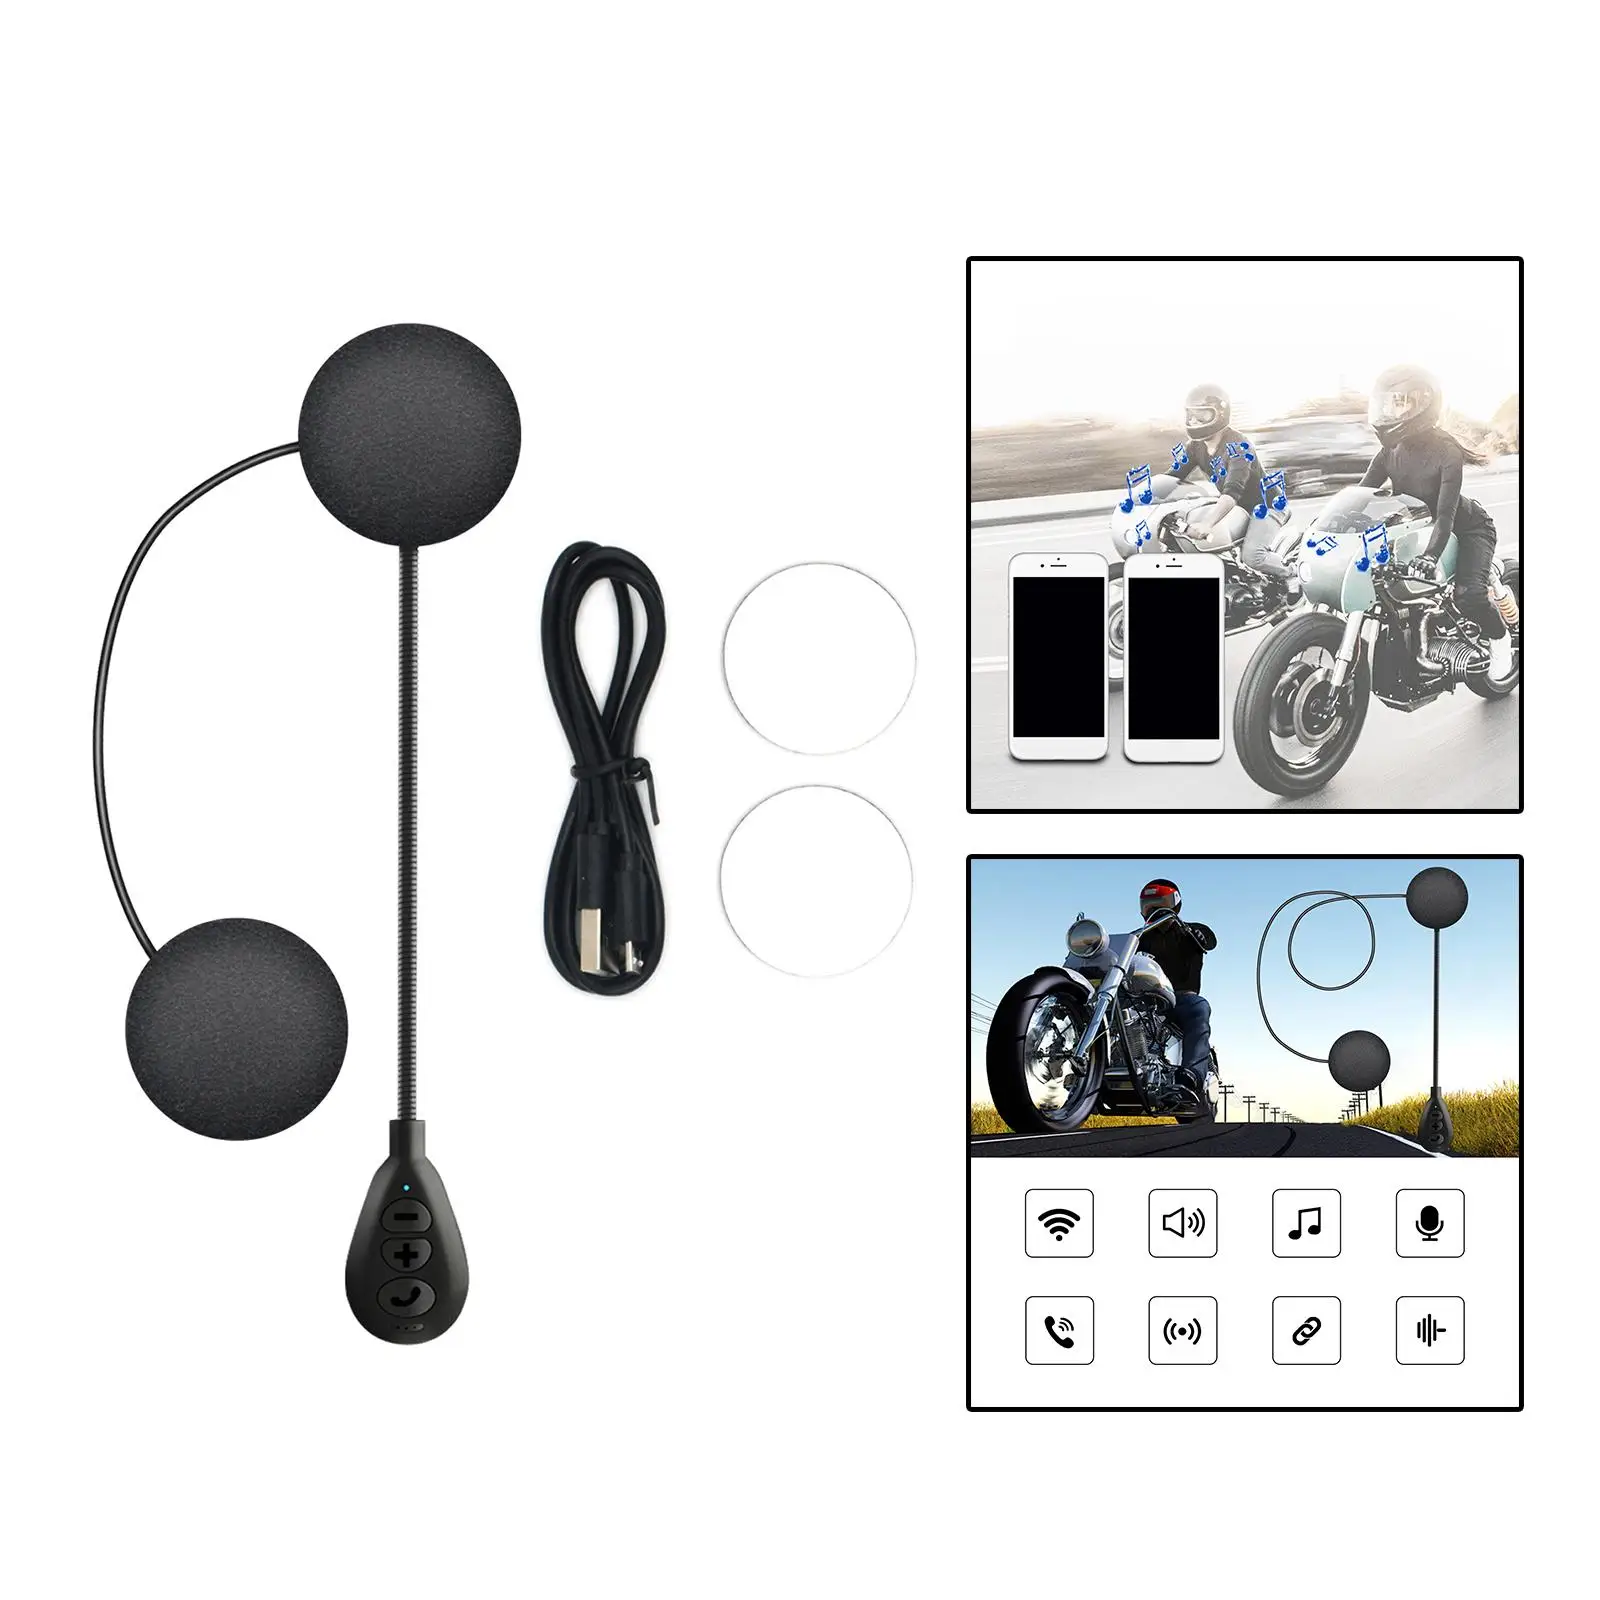 Motorcycle Bluetooth Helmet Headset Wireless Speakers 180mAh Battery 5.0 Easy Set up Universal Headphone Fit for Outdoor Sports